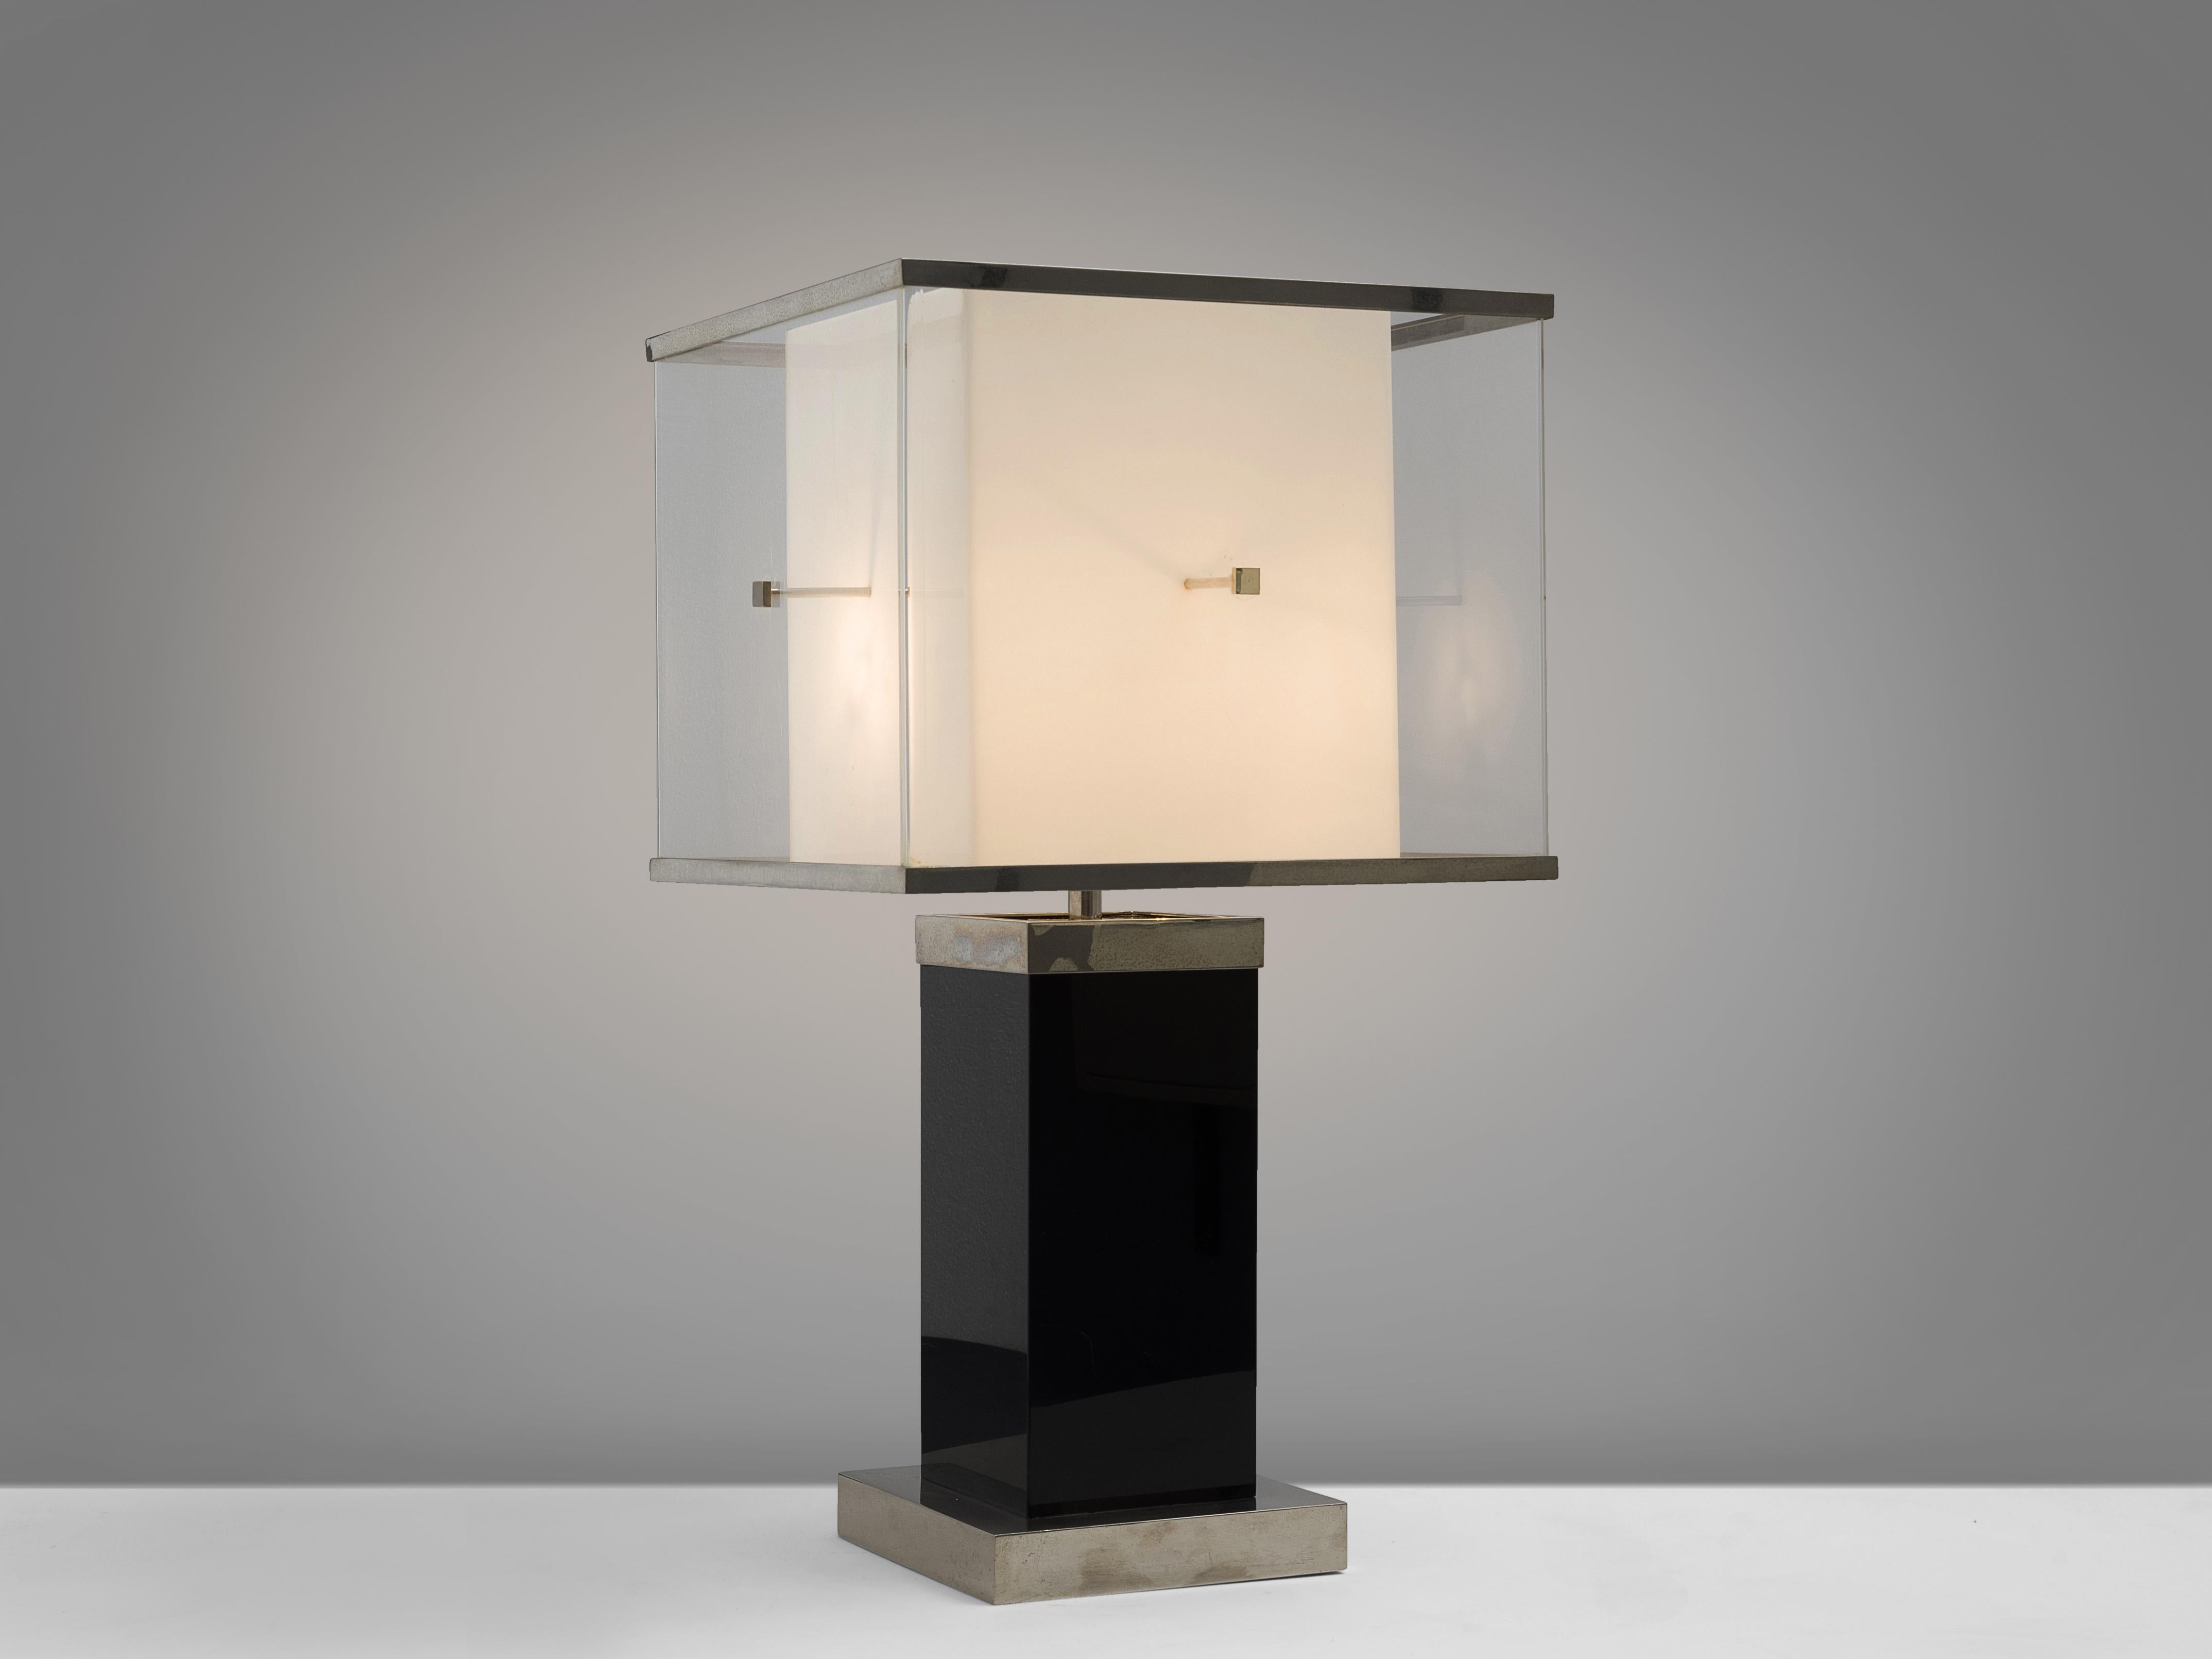 Attributed to Romeo Rega, table lamp, Lucite, Italy, 1970s.

This cubical table lamp features a small white base on which a deep black foot rests. On top of the black and white base stands a large shade. The design is typical for postwar,